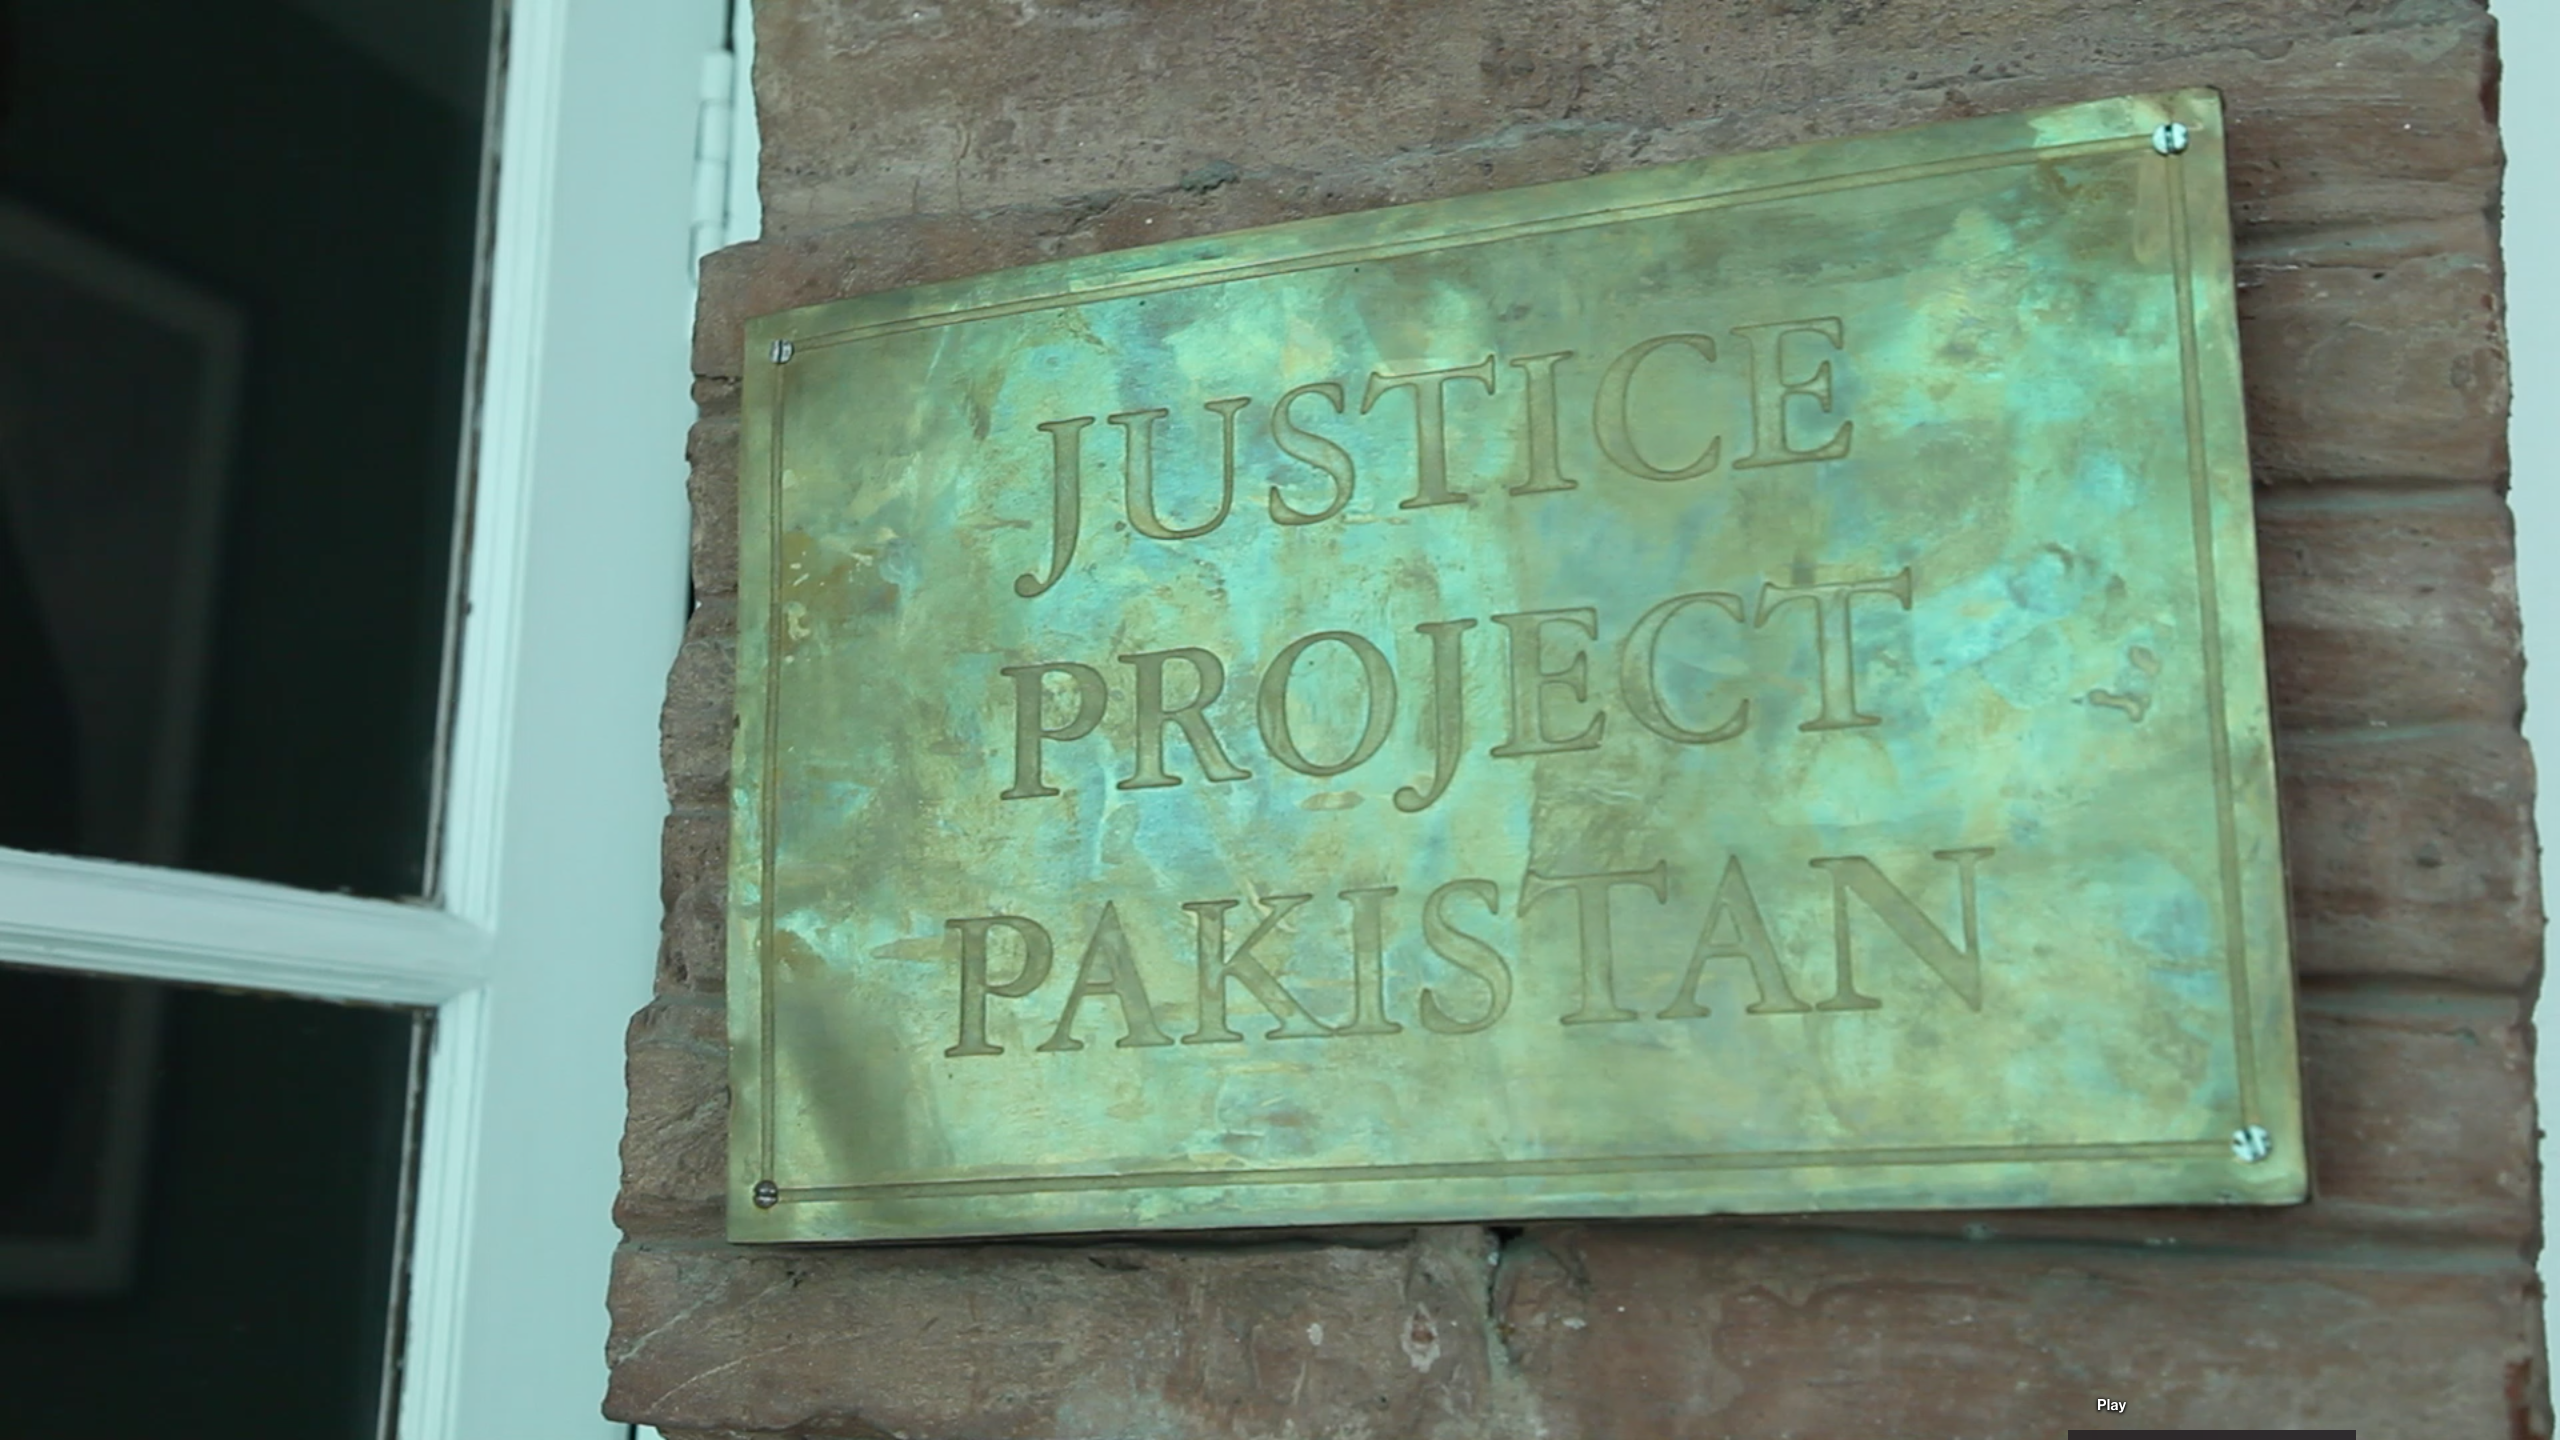 Justice Project Pakistan, a pro bono law firm that provides legal services to death-row inmates, managed to get a stay on Hayat's execution.